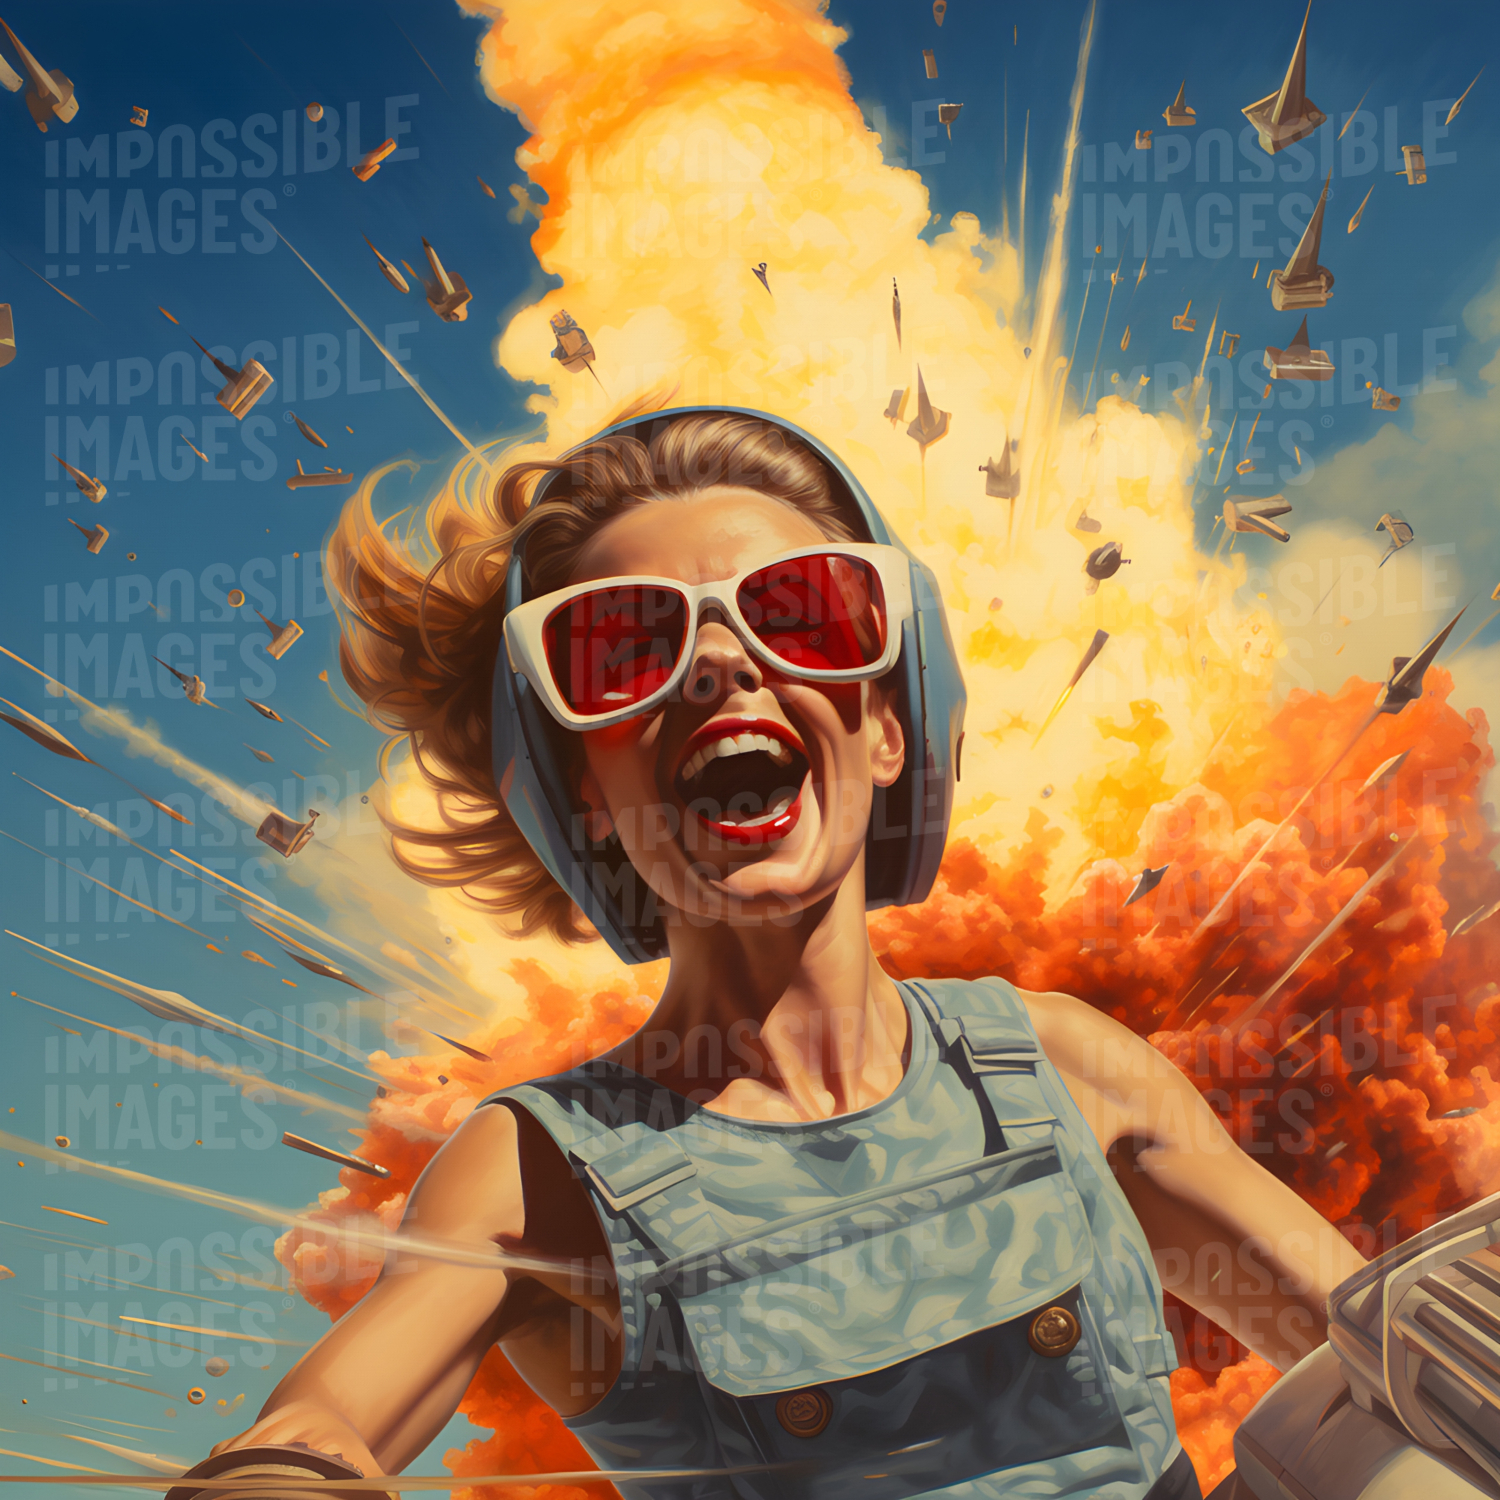 Laughing woman in sunglasses and dungarees with a massive explosion behind her